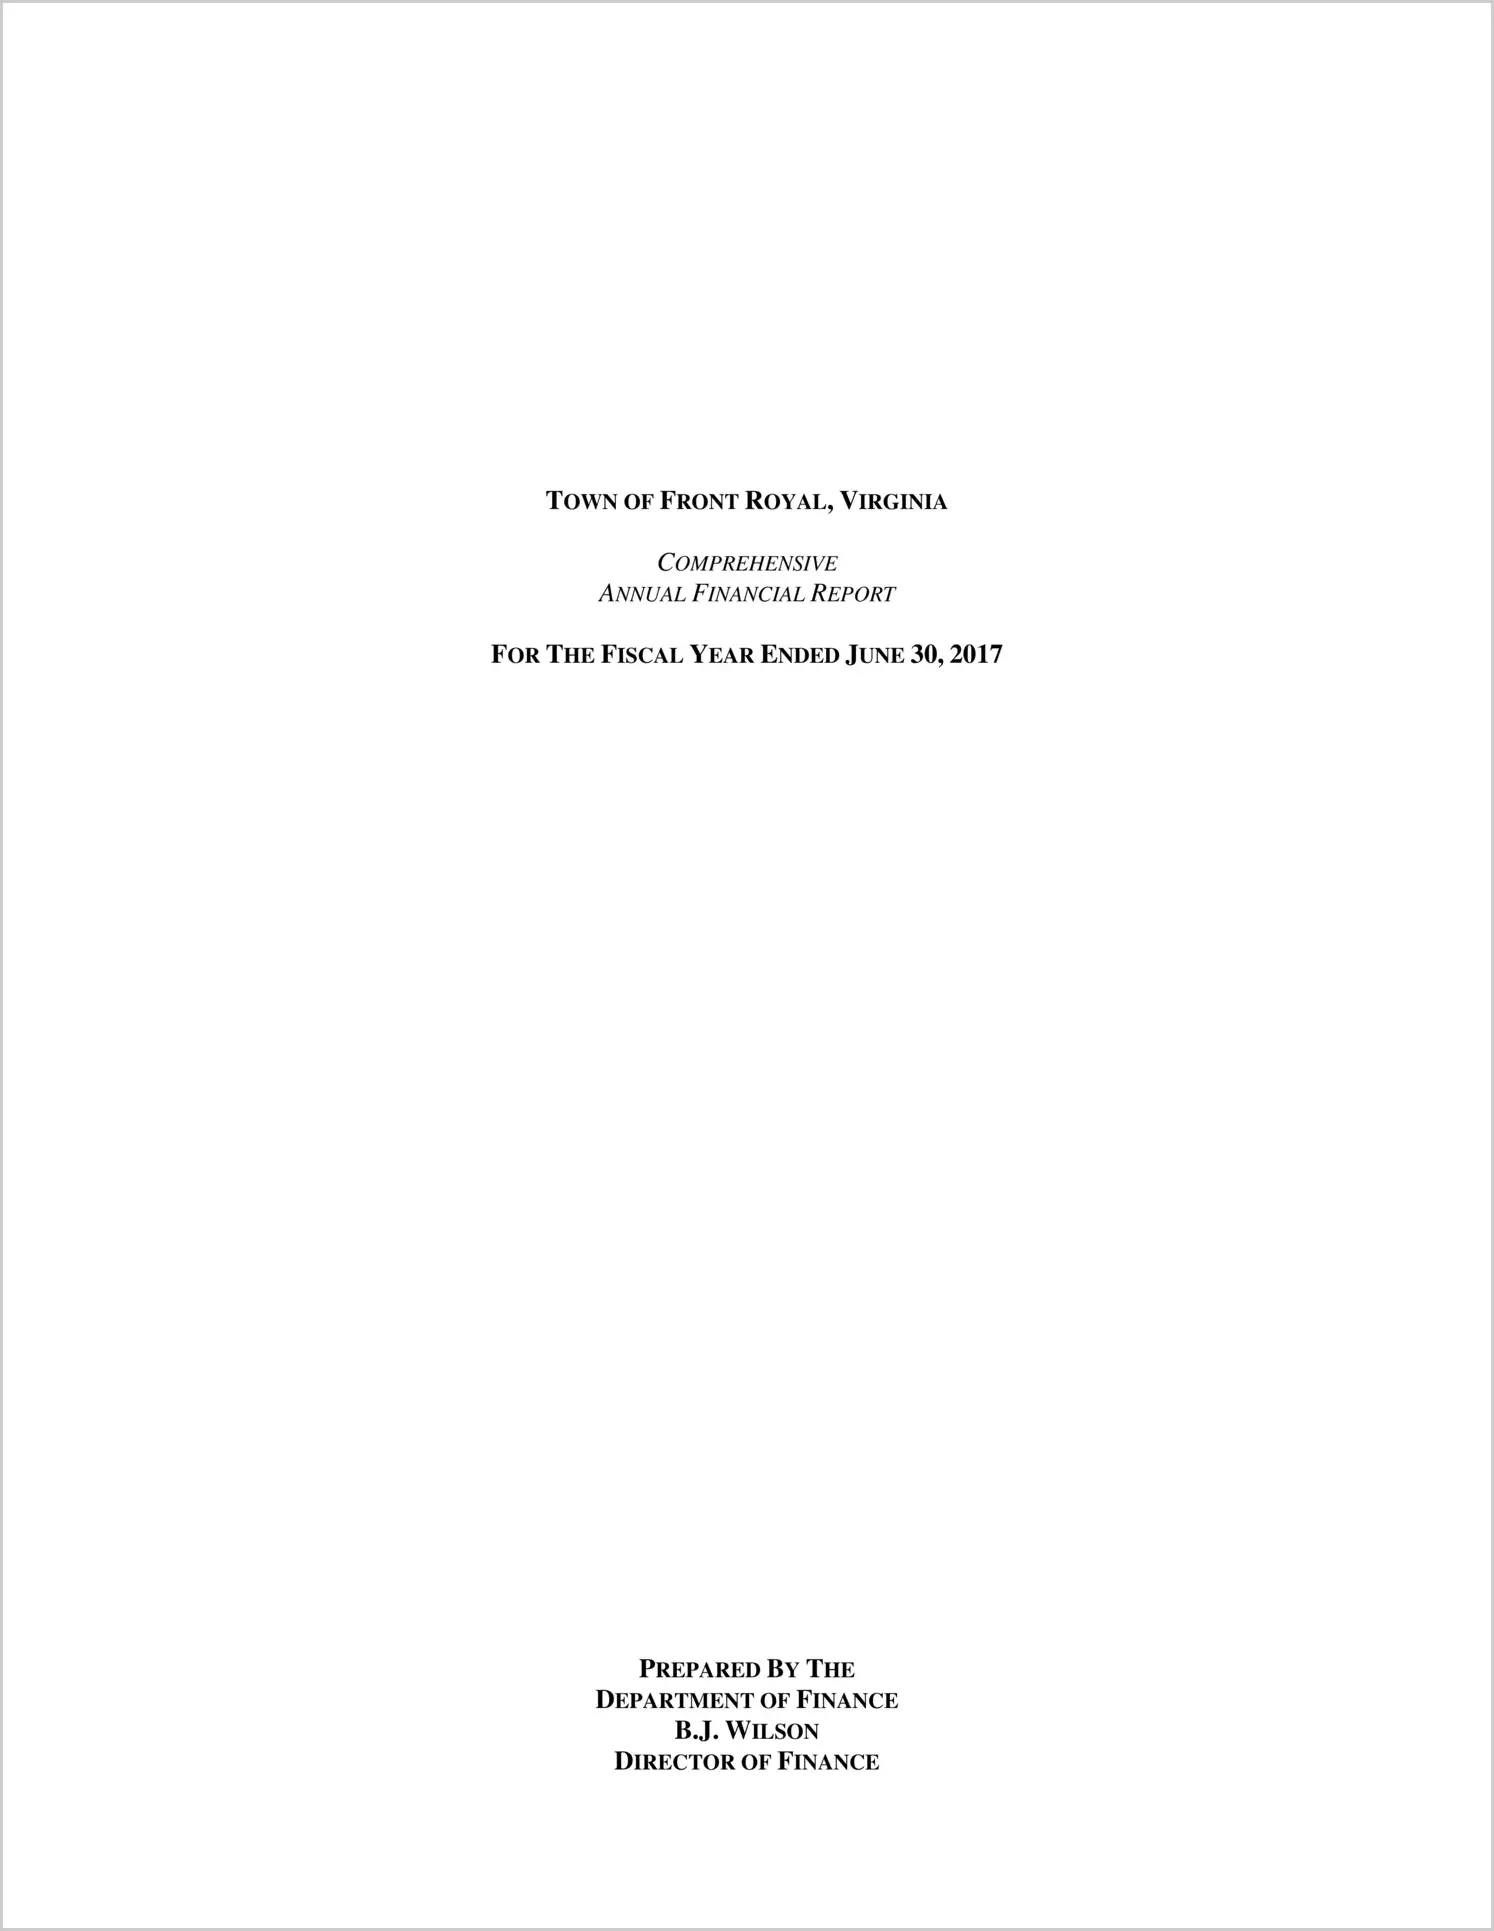 2017 Annual Financial Report for Town of Front Royal